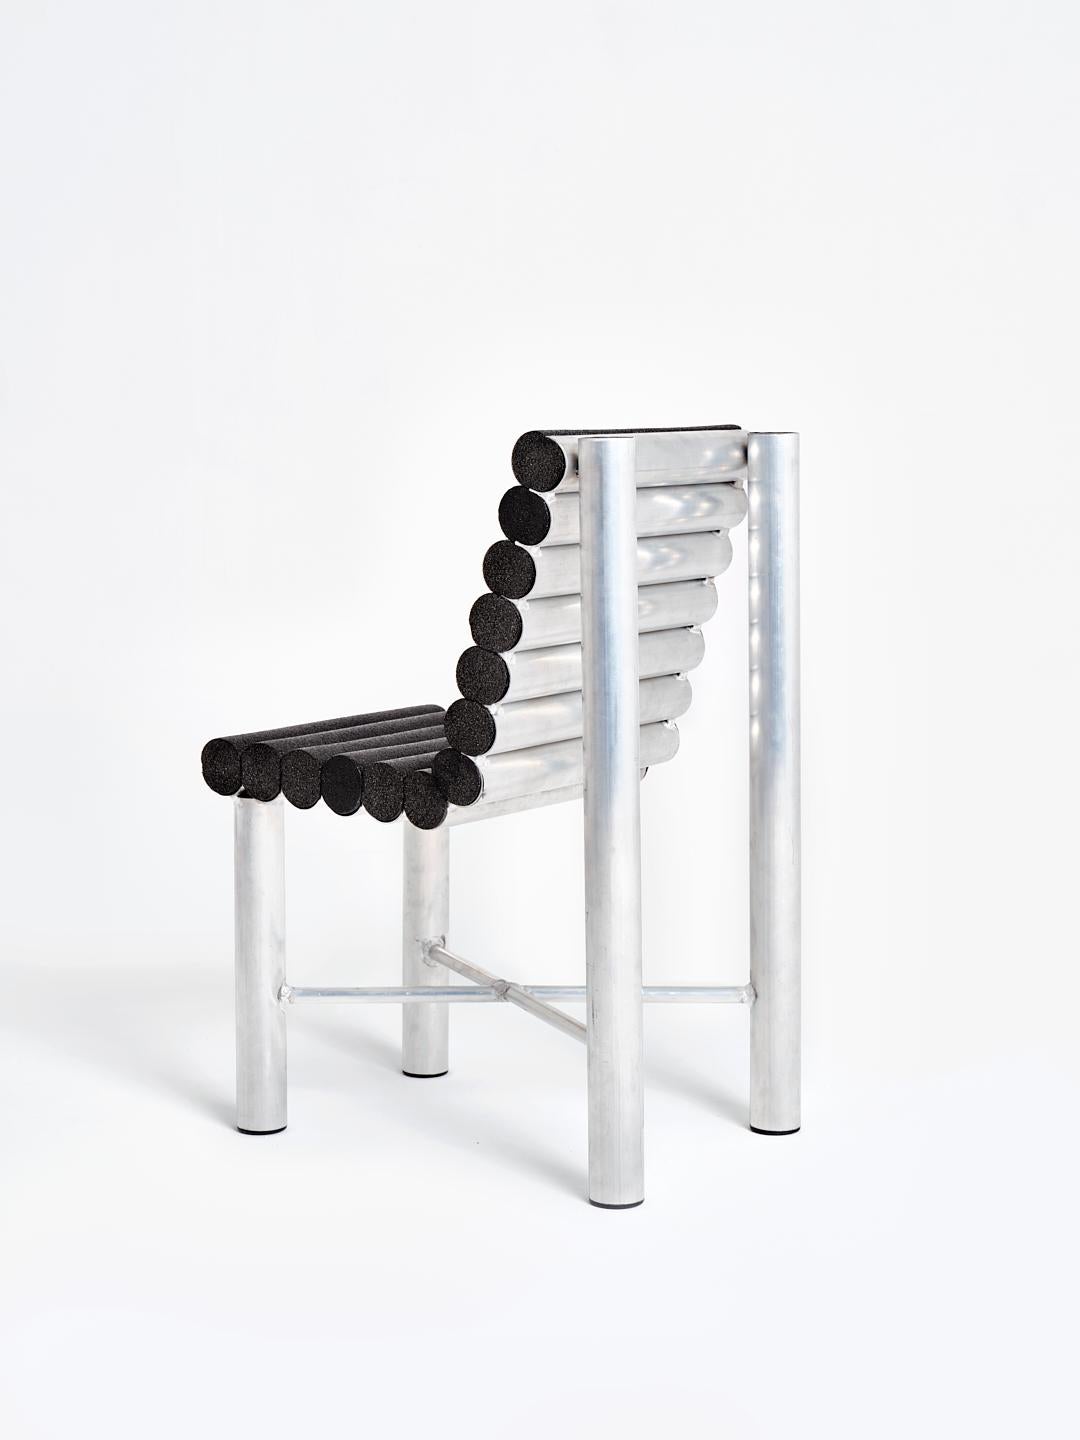 Contemporary aluminium chair model ''Piscine'' by Axel Chay - Marseille France.